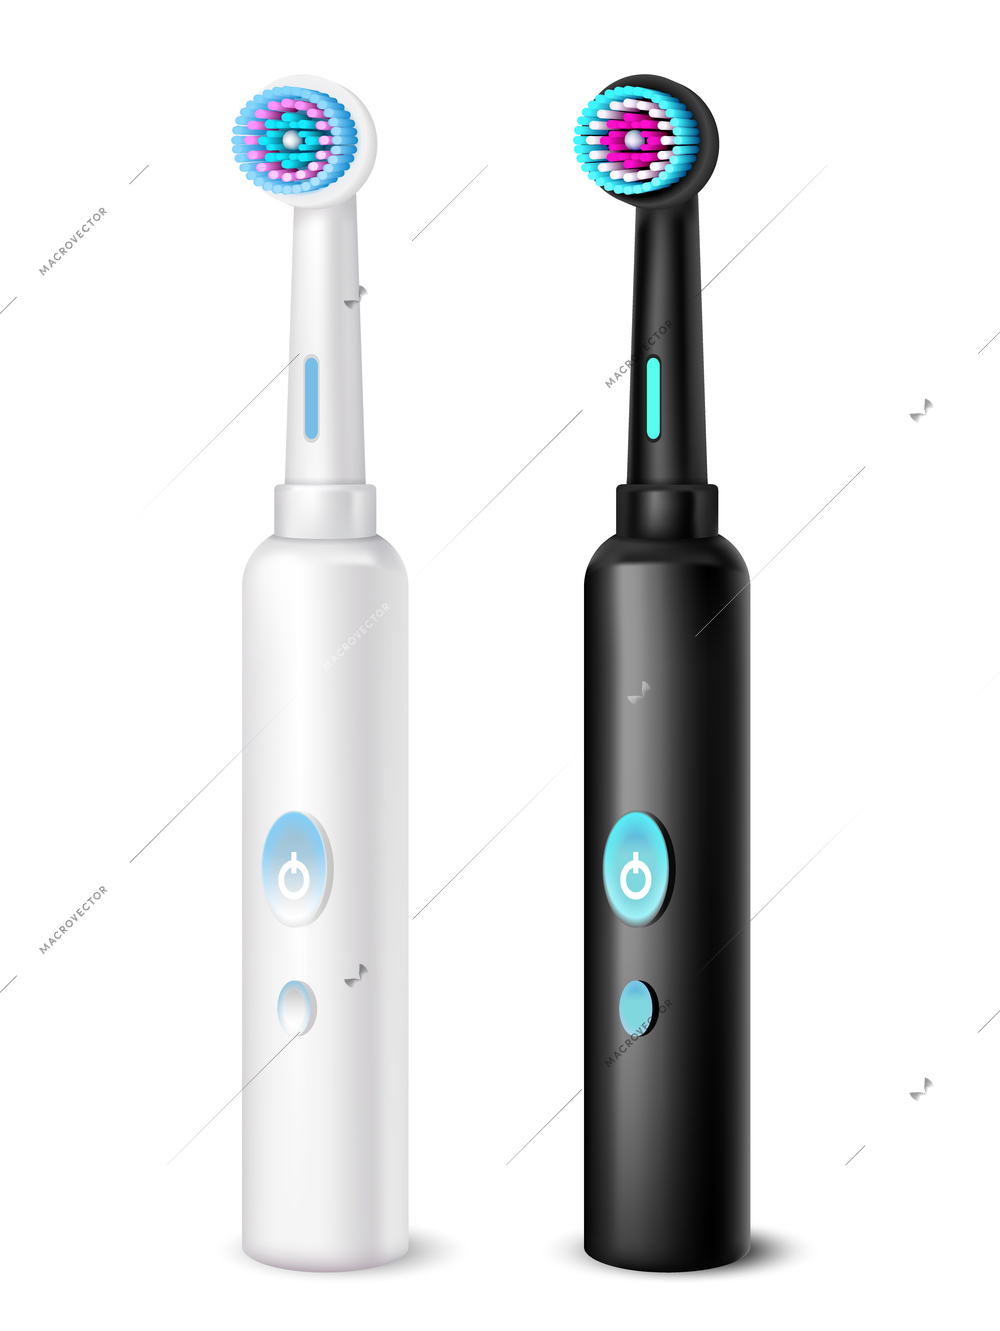 Black and white electric toothbrushes decorative icons set on white background in realistic style isolated vector illustration